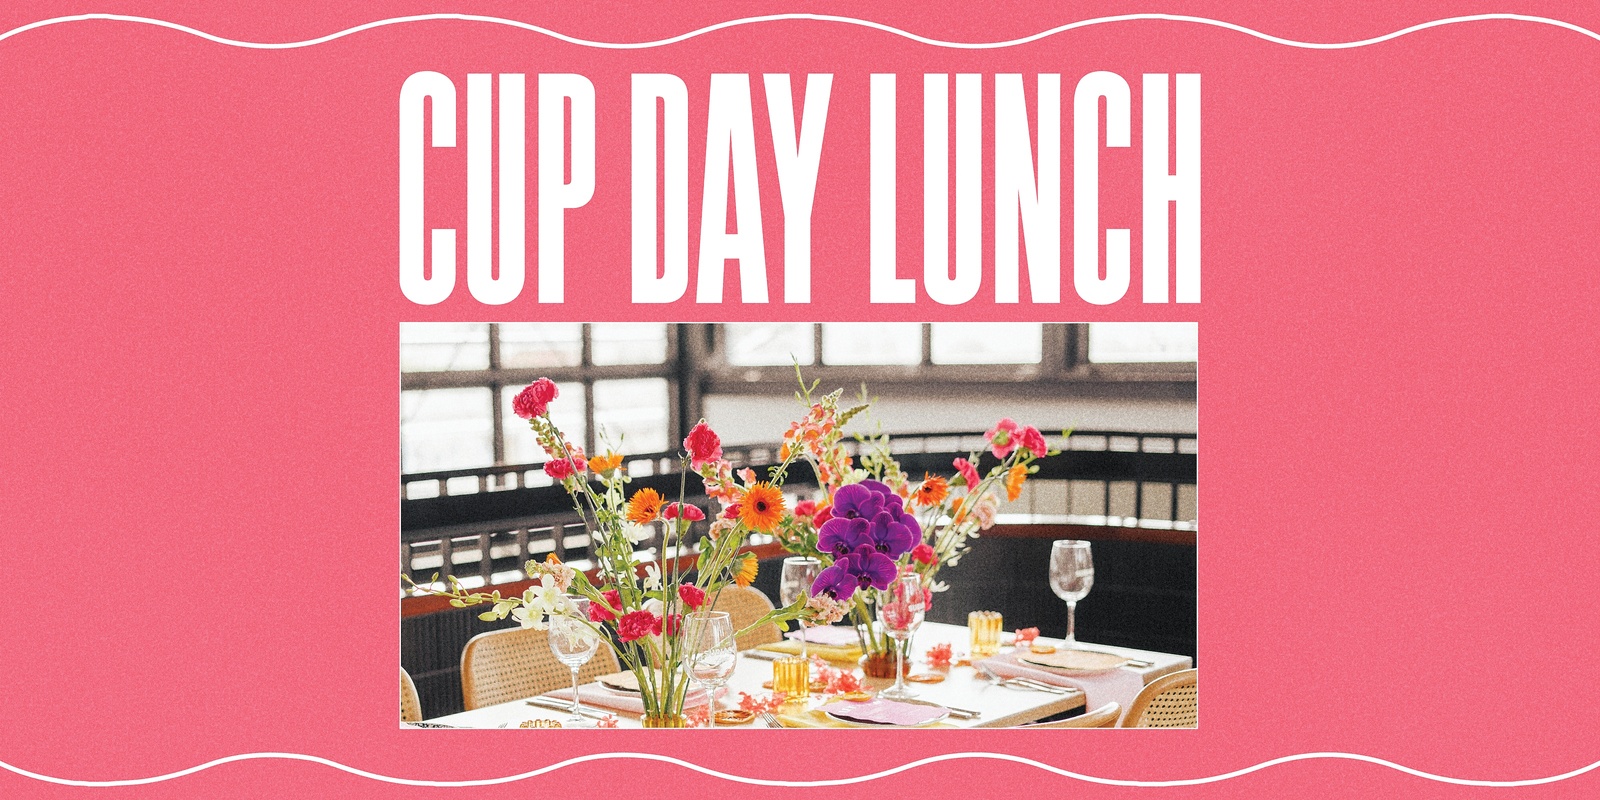 Banner image for Cup Day Lunch